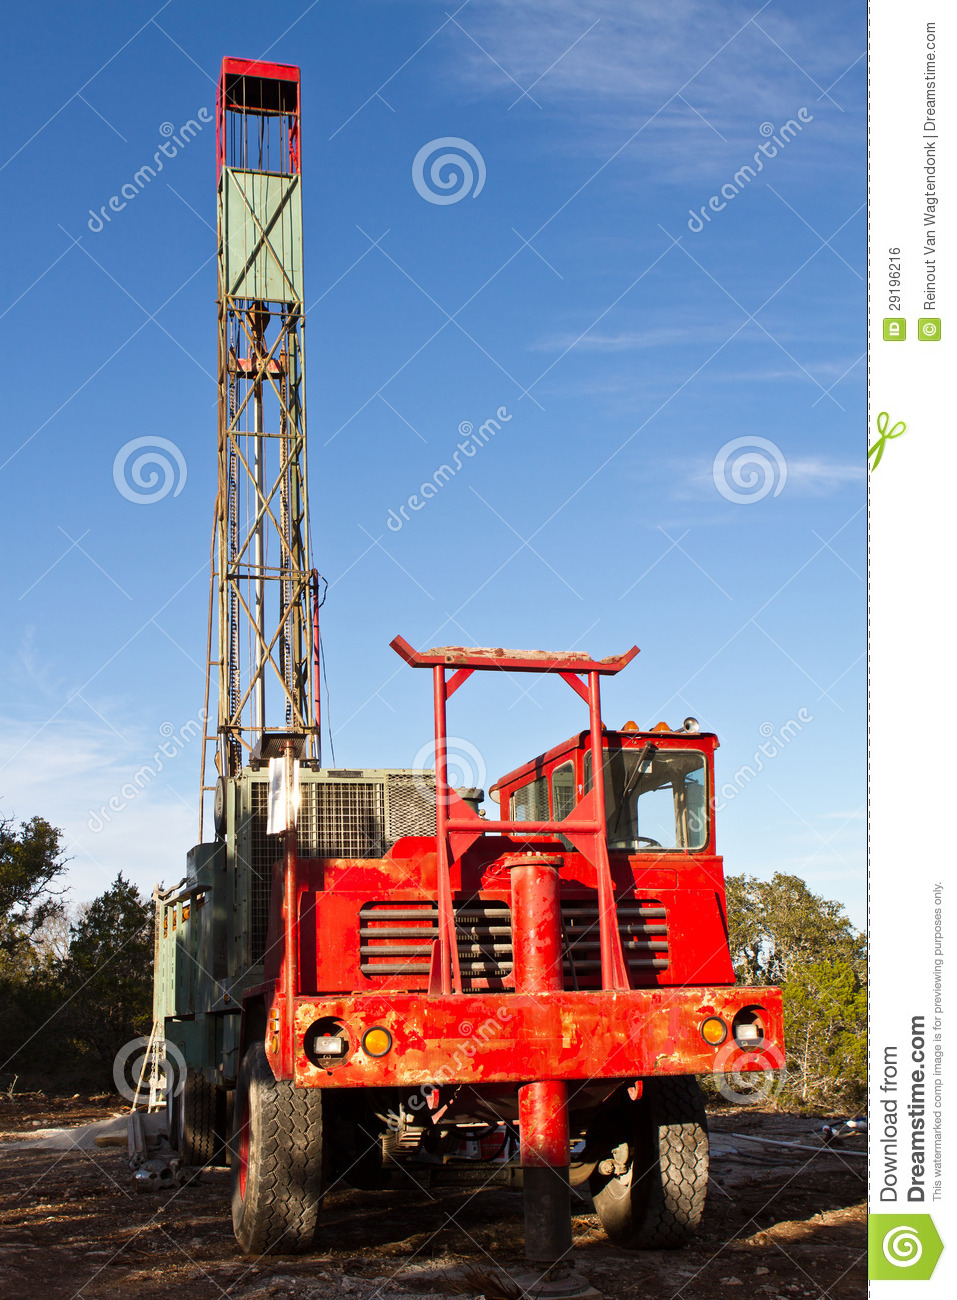 Water Well Drilling Truck Royalty Free Stock Image   Image  29196216